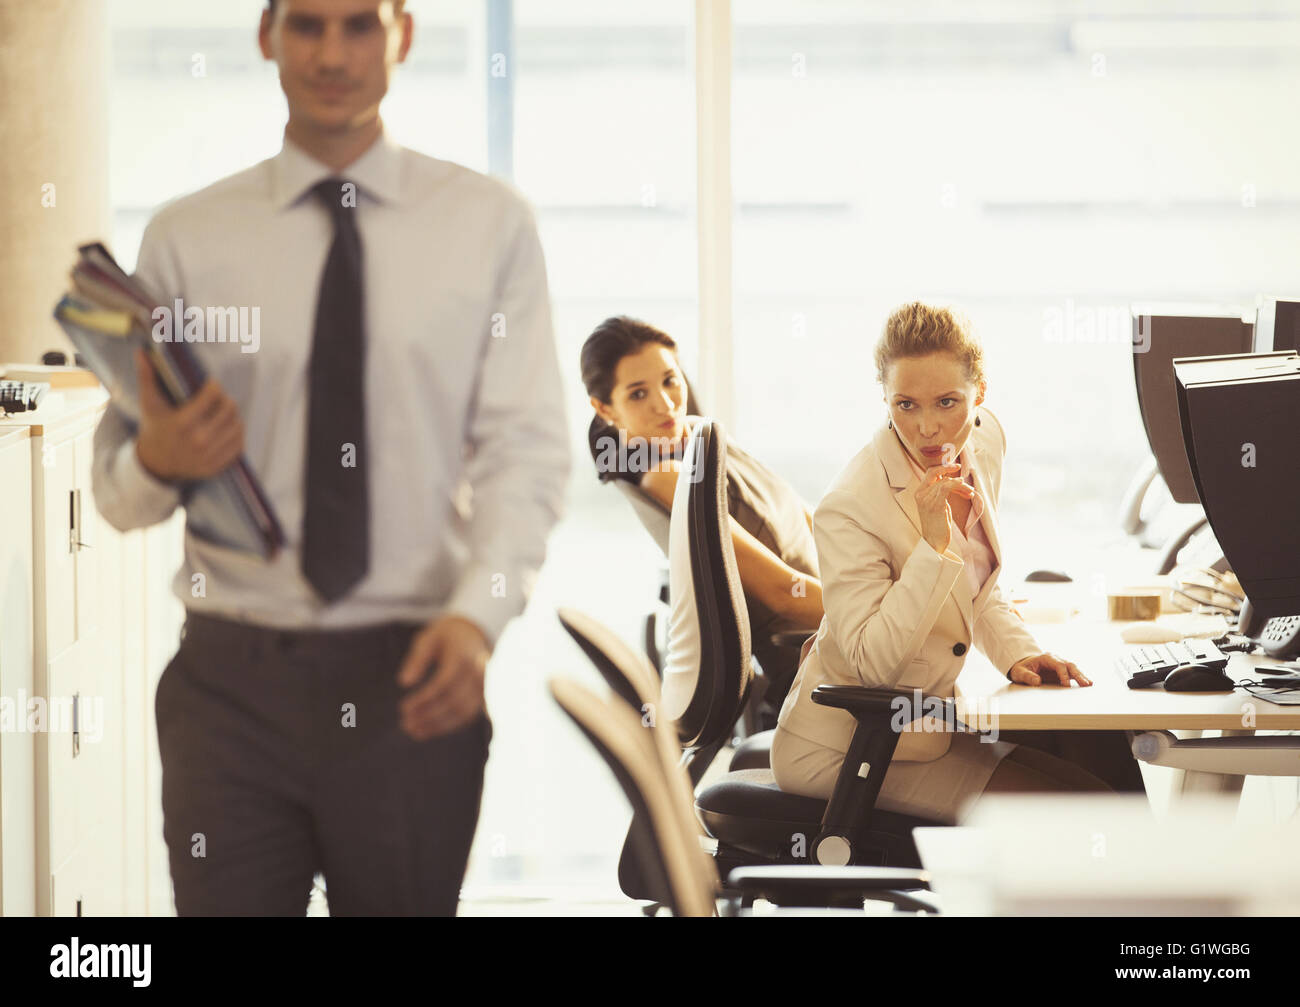 Businesswomen checking out passing businessman in office Stock Photo